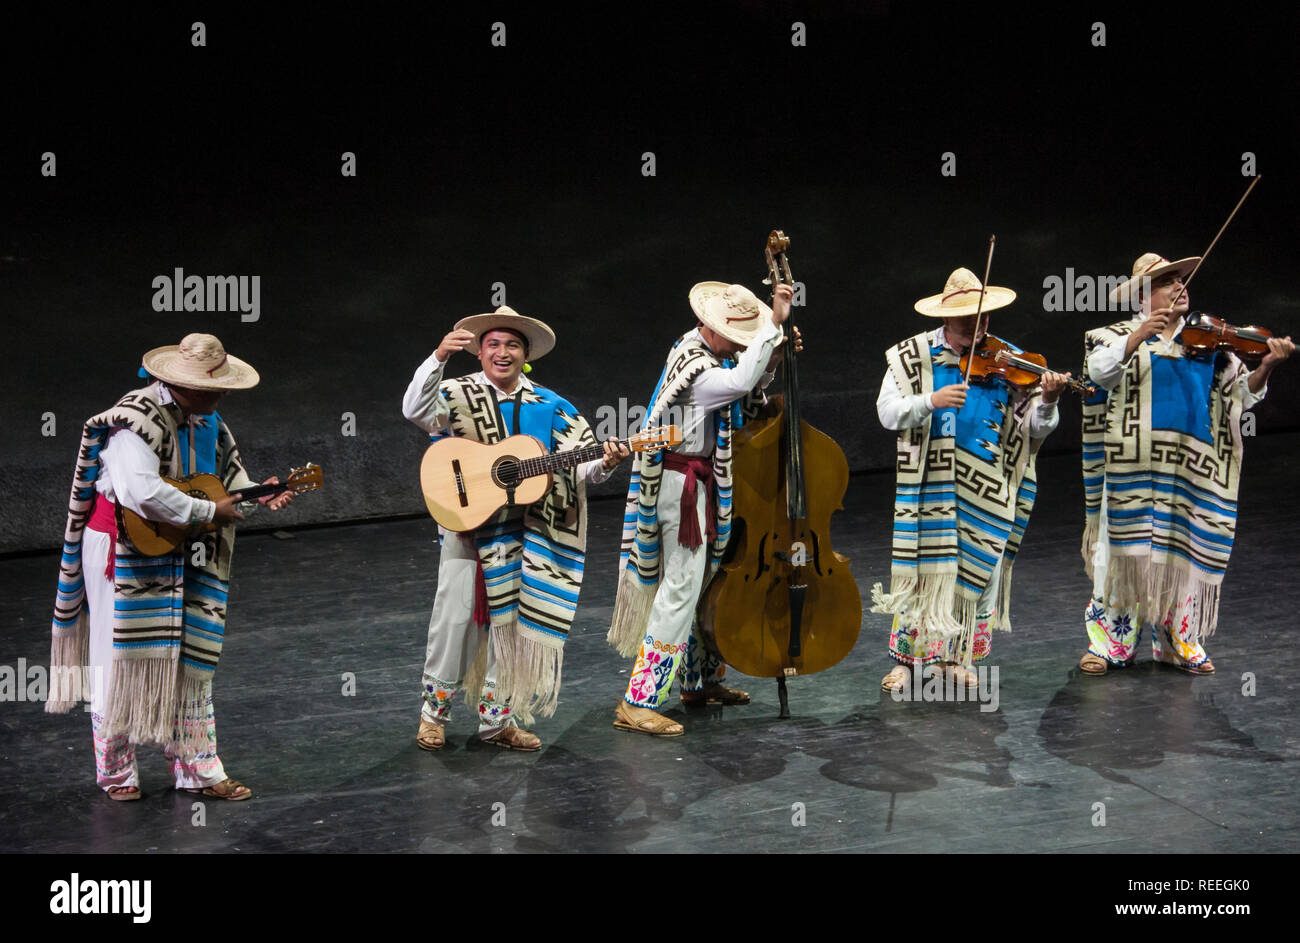 Musicians in costume performing traditional music at Xcaret Mexico Espectacular dinner show at Xcaret eco theme park, Riviera Maya, Mexico. Stock Photo